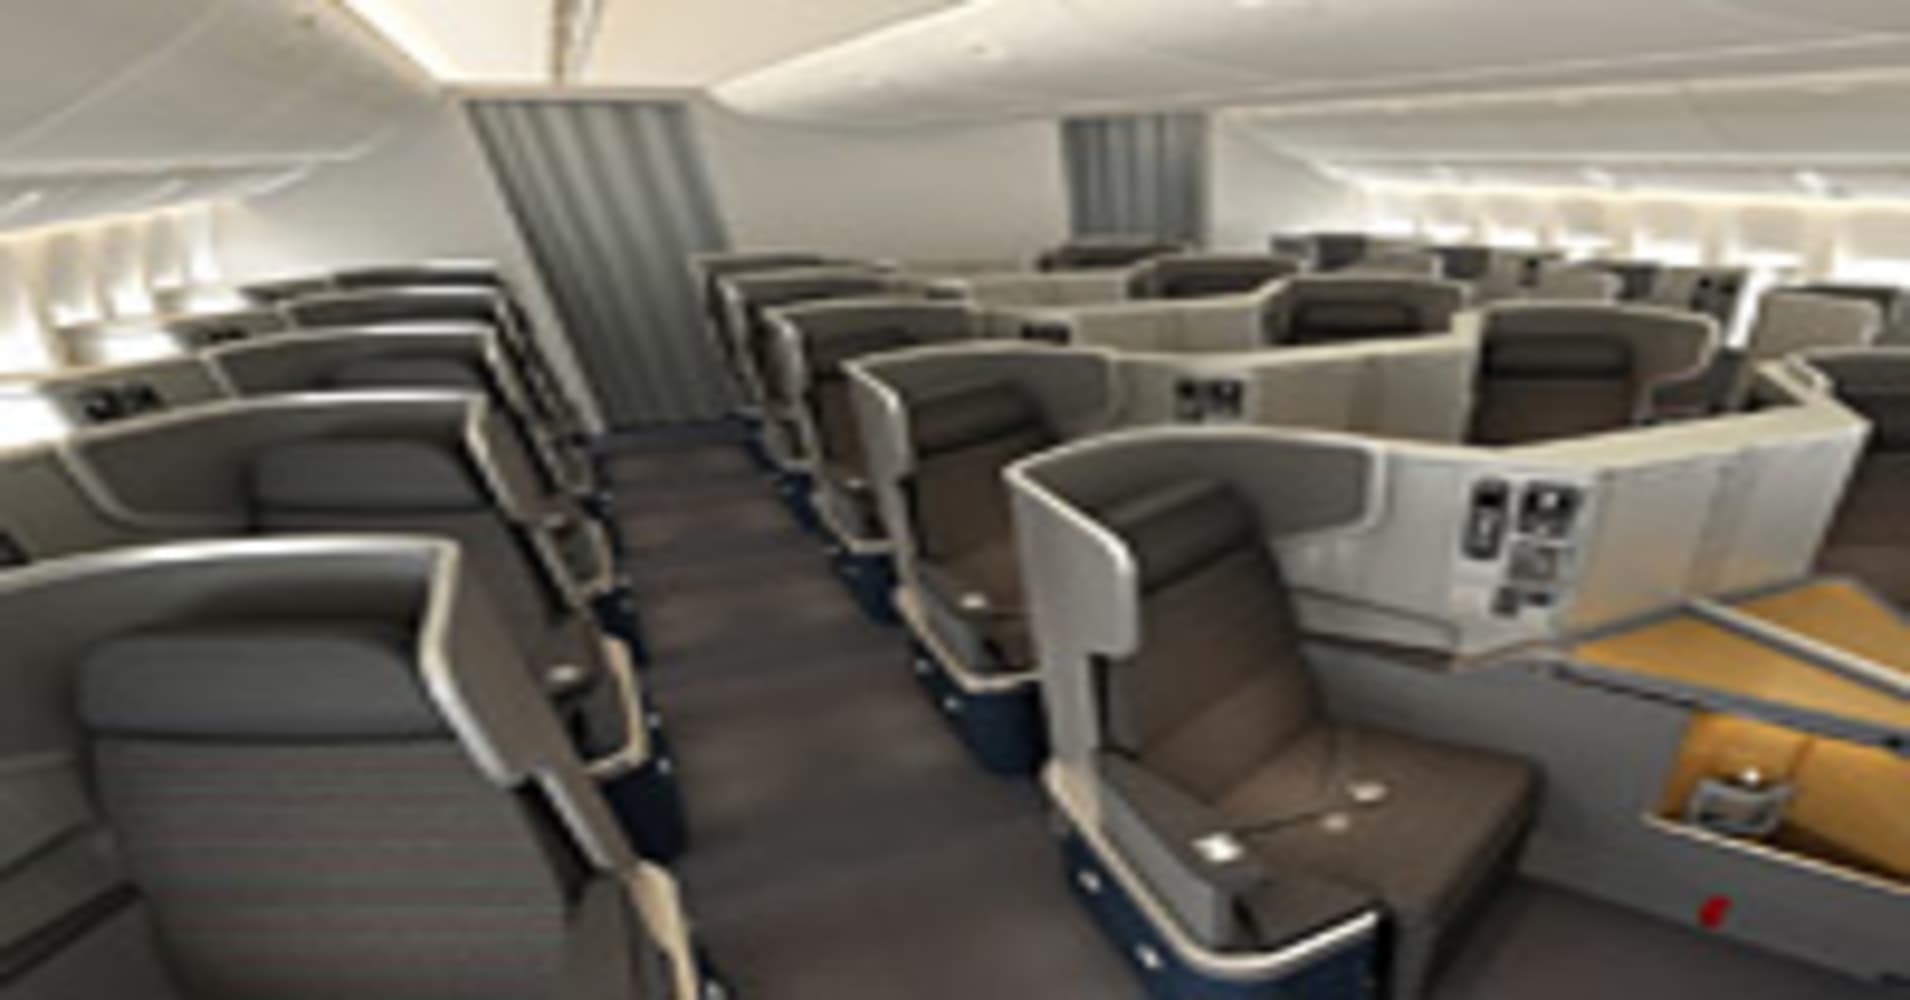 American Announces New Aircraft Routes Cabin Upgrades